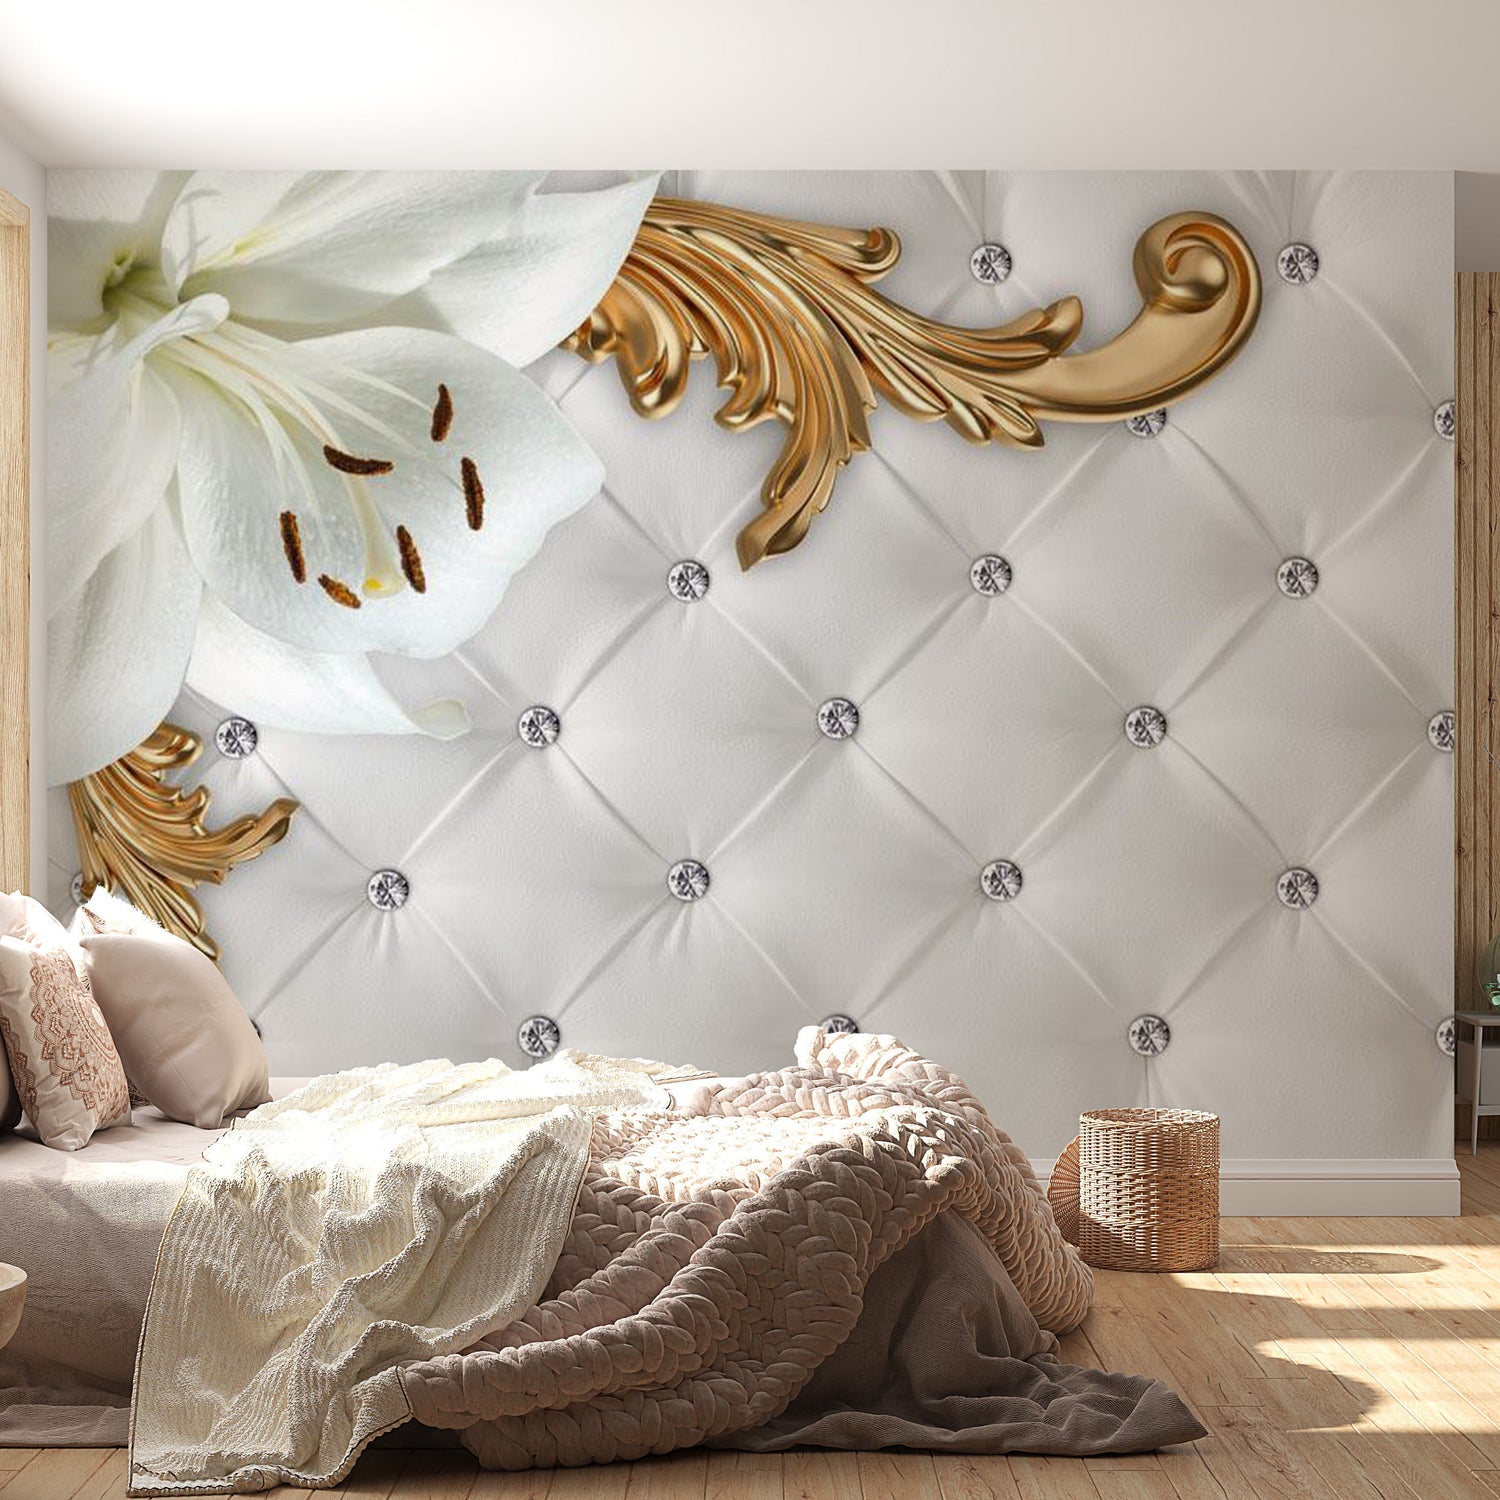 Peel & Stick Glam Wall Mural - Royal Dream - Removable Wall Decals